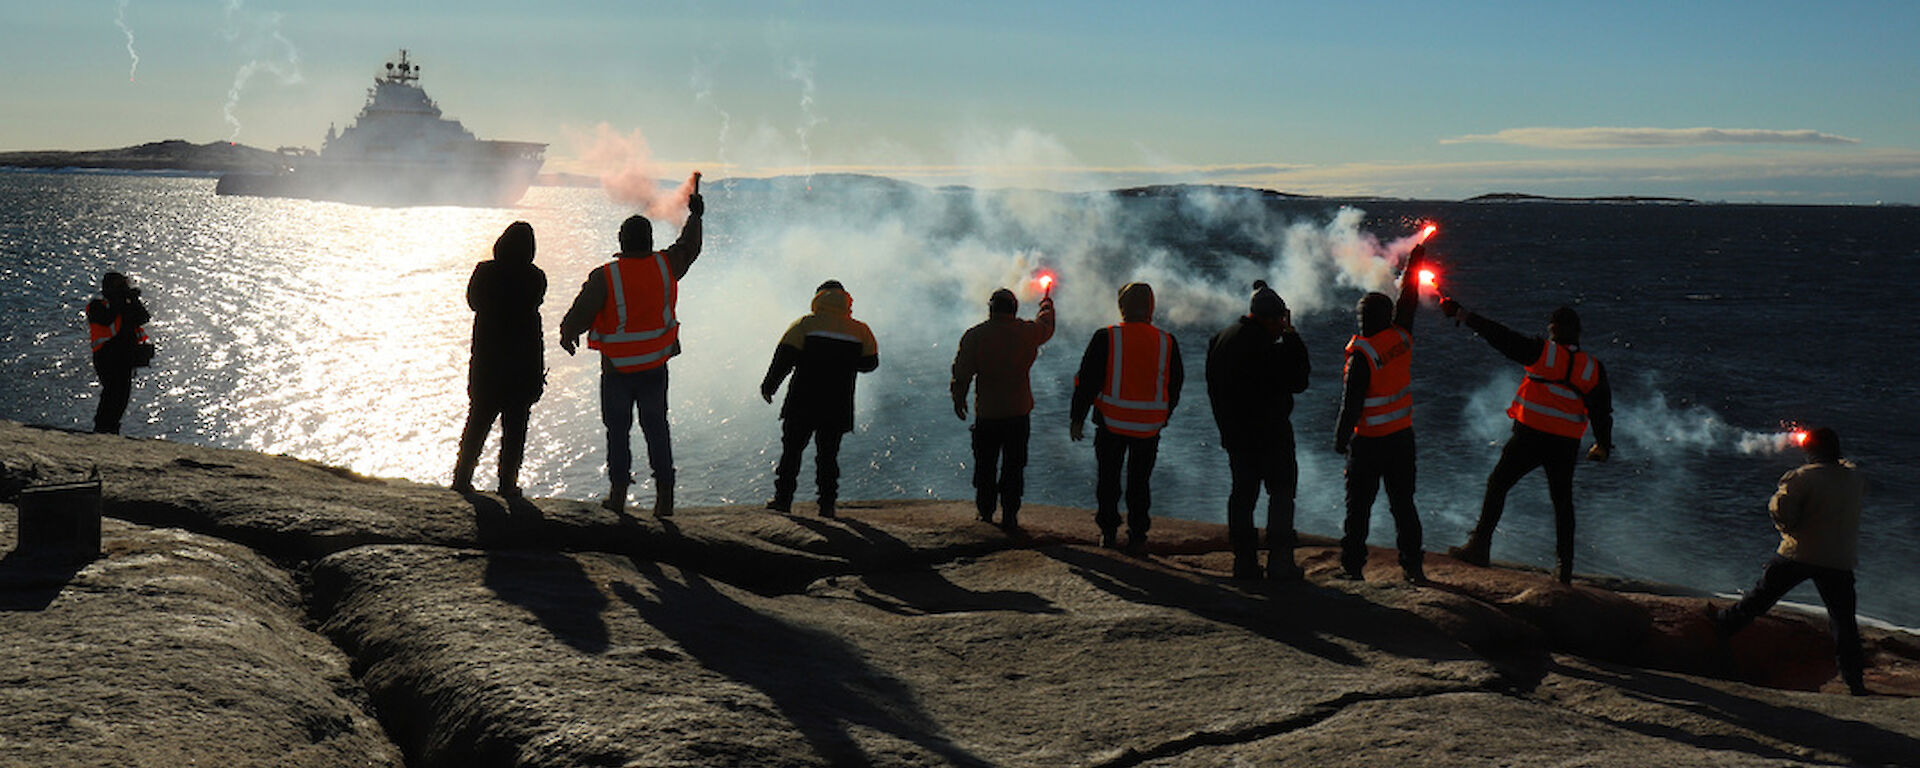 Ten people standing in a line on a rocky outcrop, with backs to camera and holding lit flares. They wave farewell to a ship in the distance.